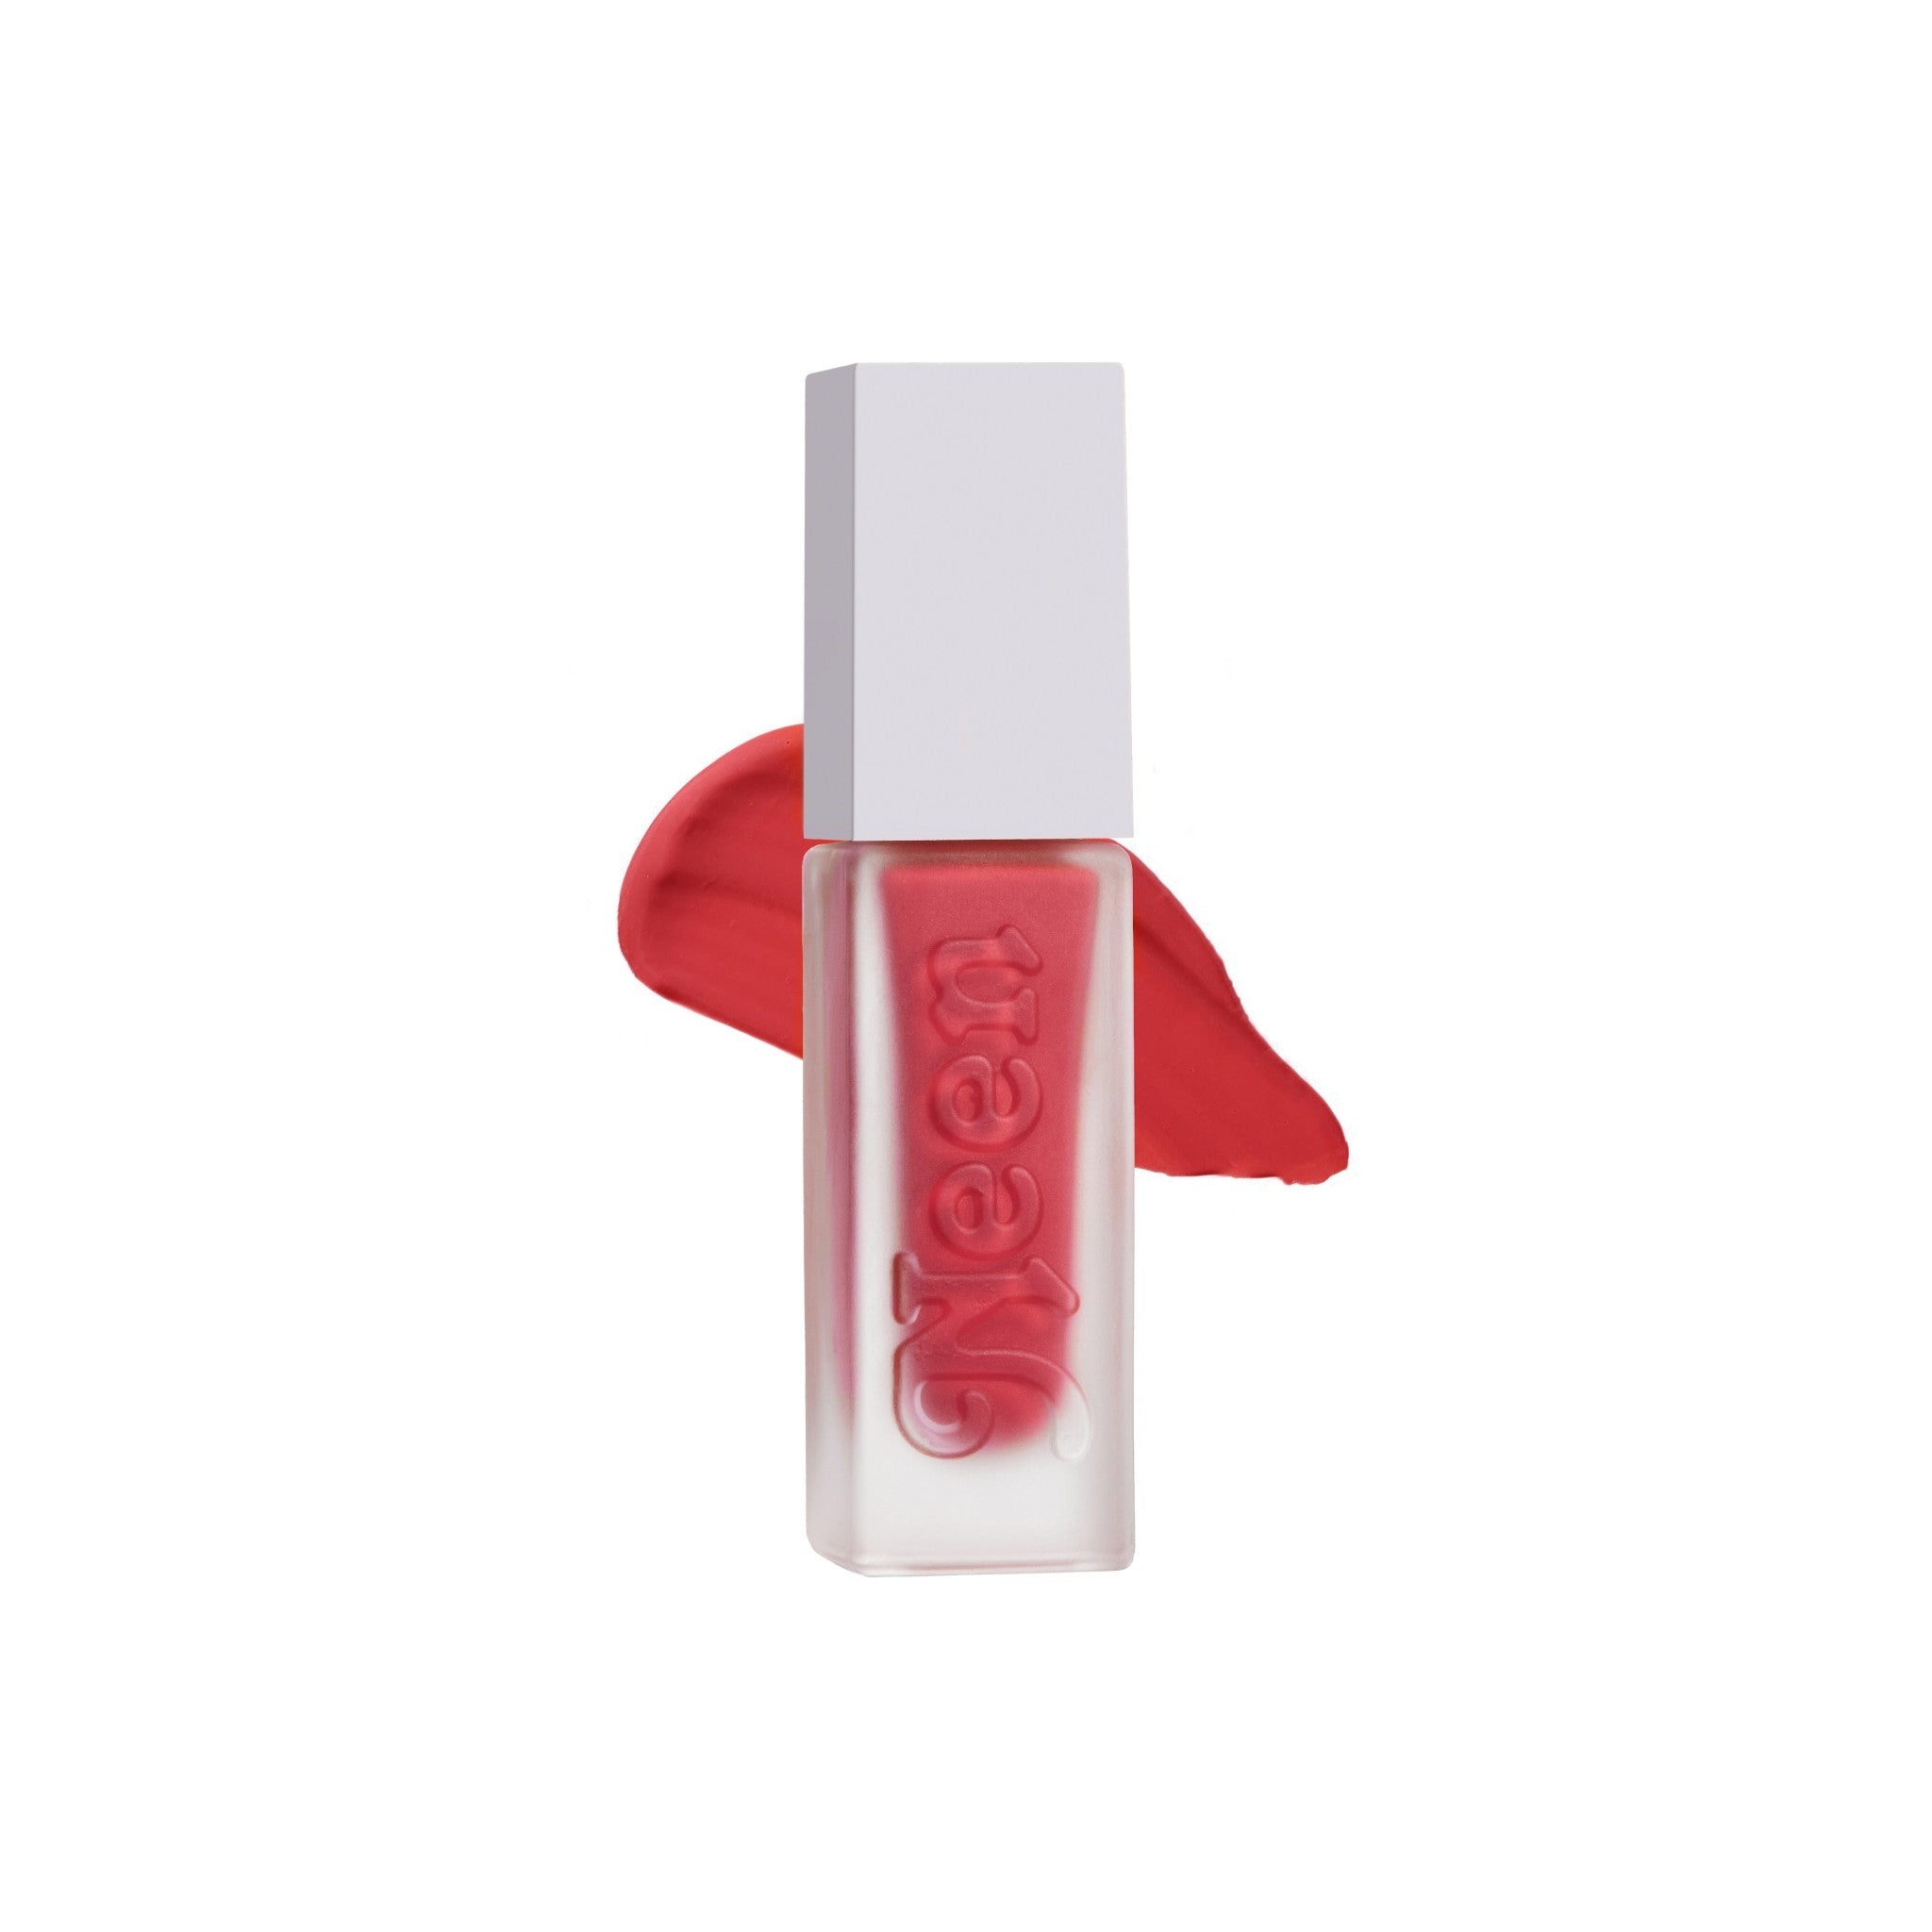 Neen Going Steady Longwear Lip Color/Shade variant: Lucky main image. This product is in the color red